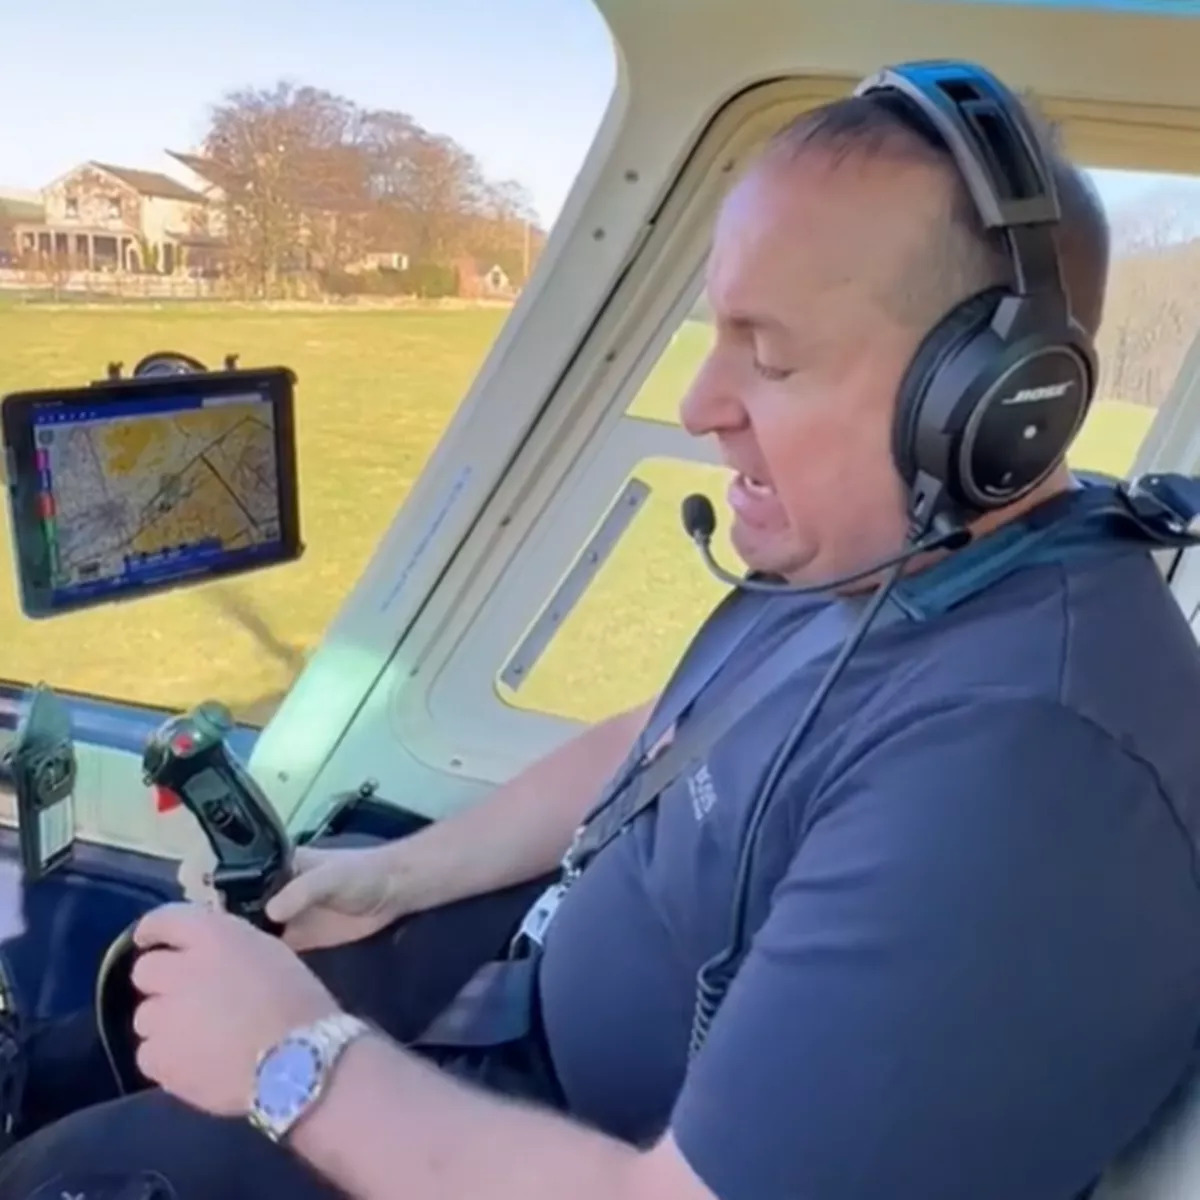 Man Shows What Happens After You Let Go Of A Helicopter Lever